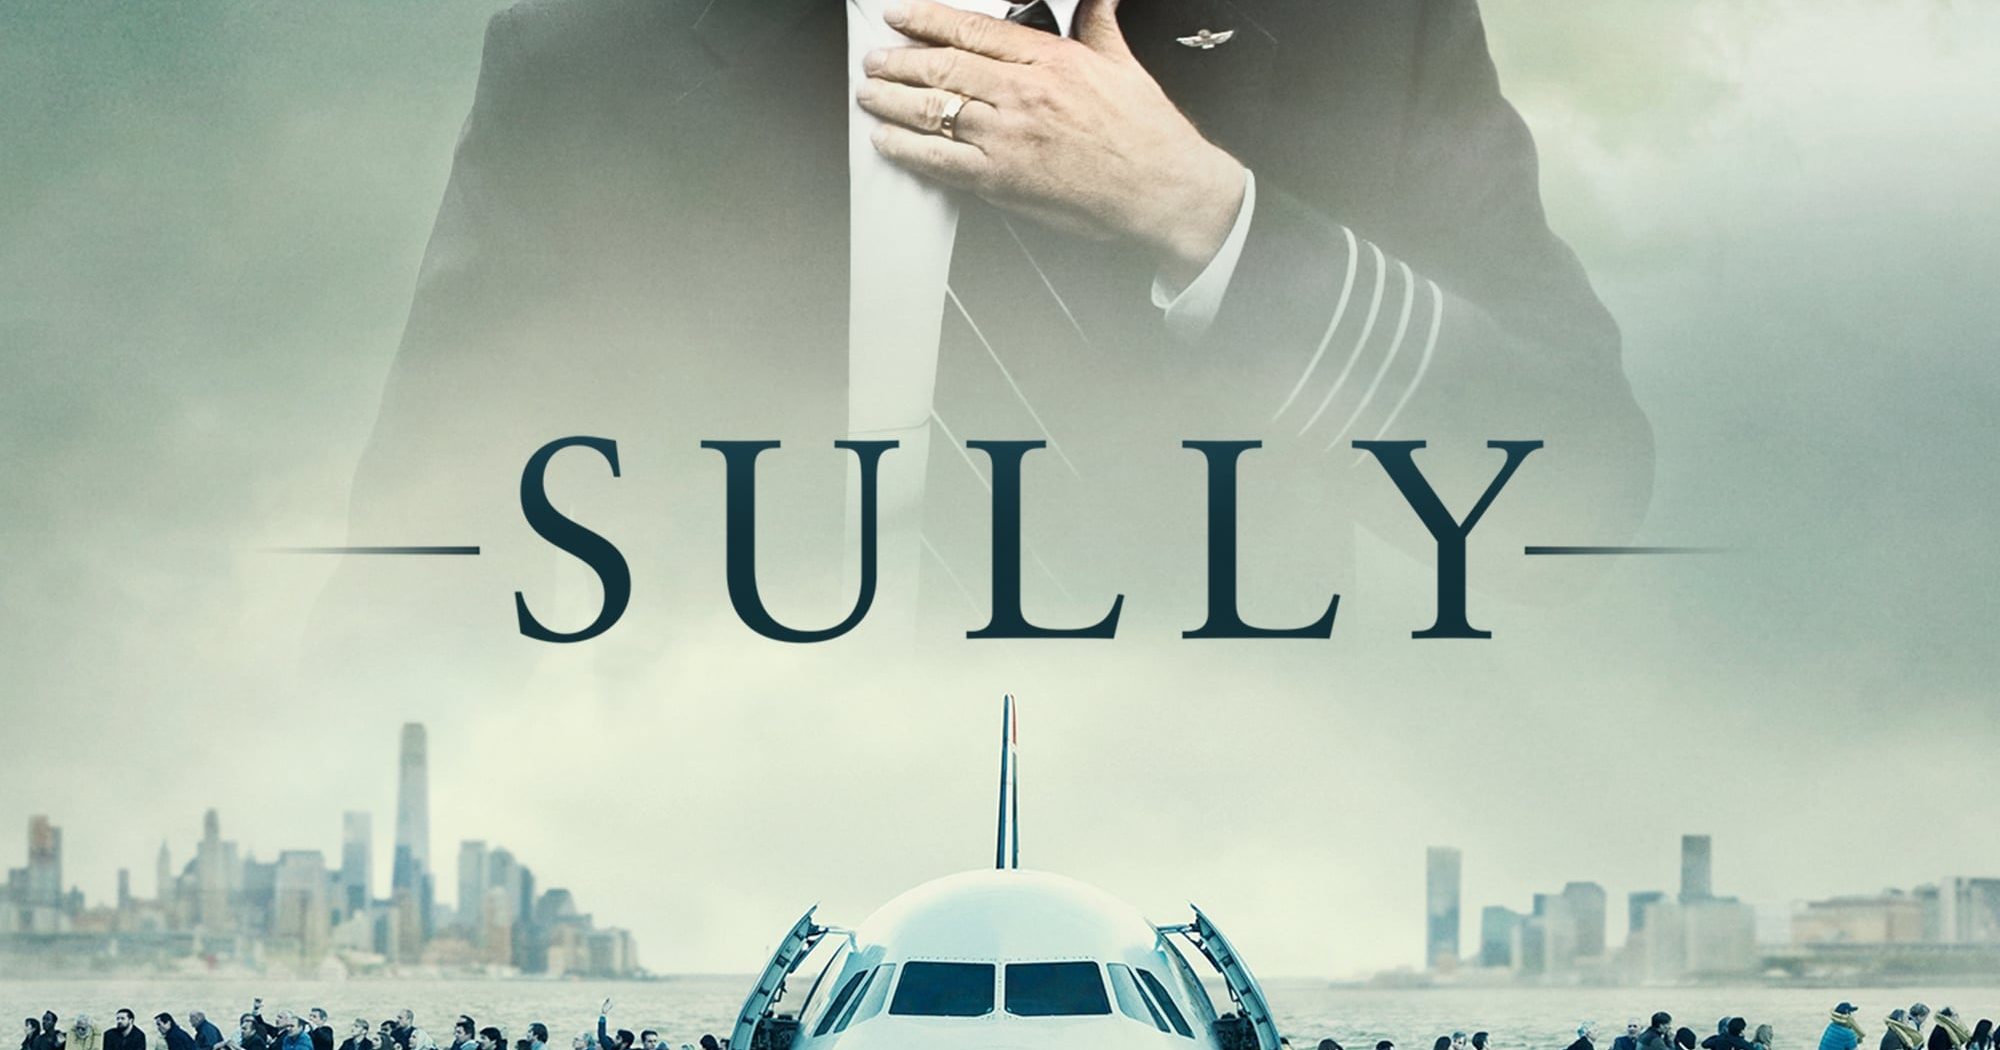 Poster for the movie "Sully"